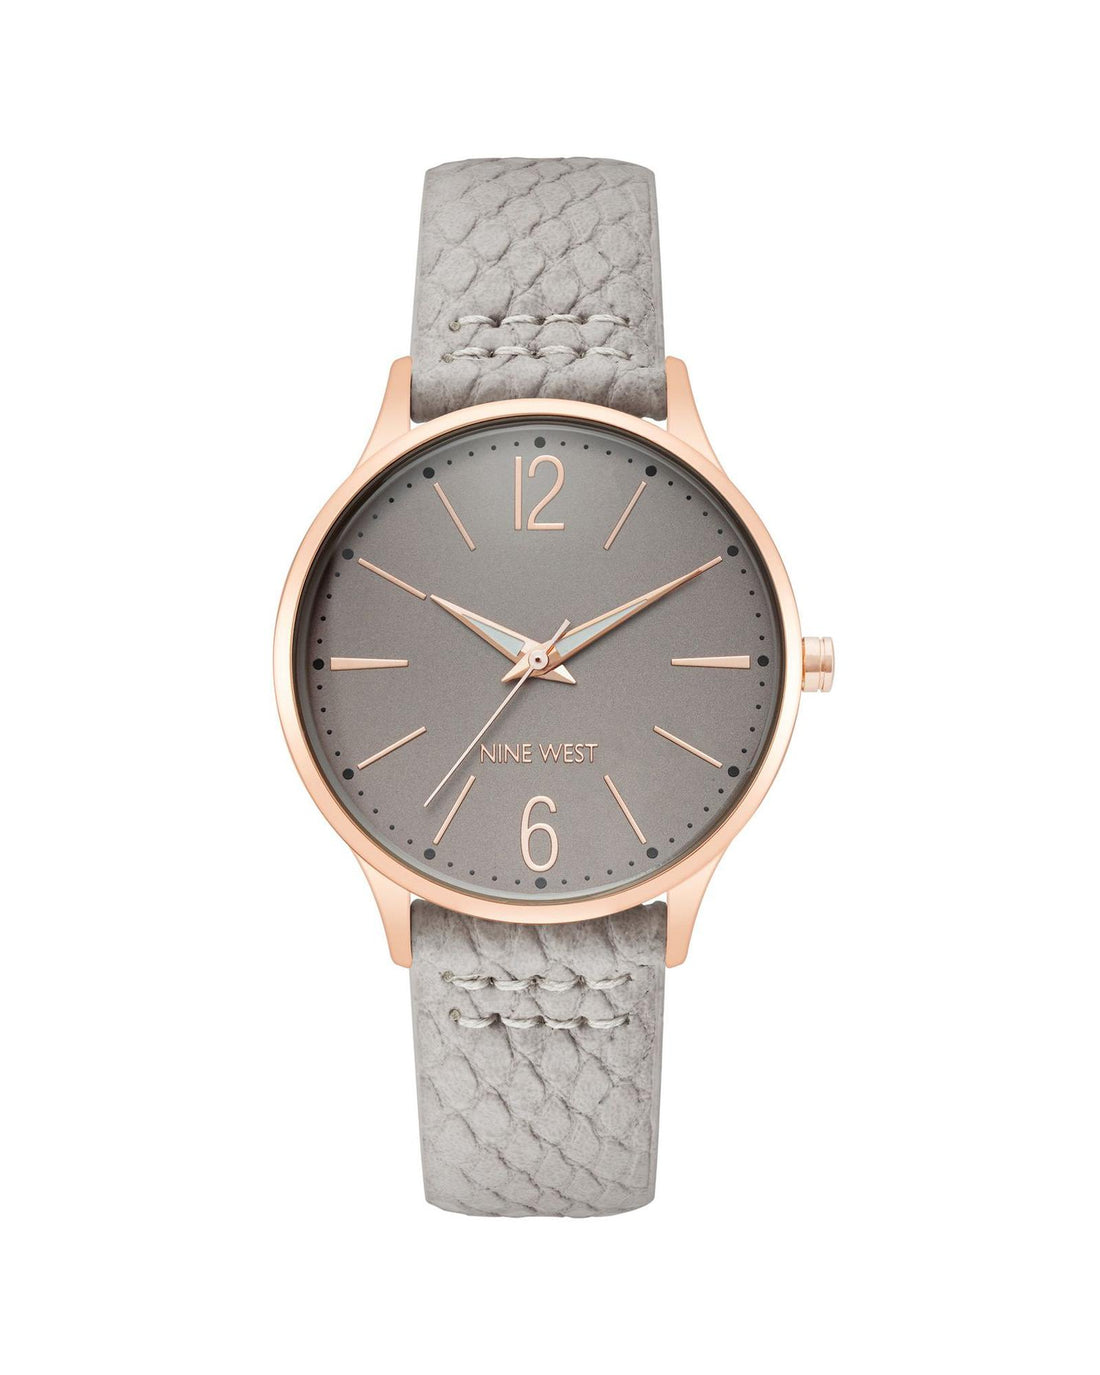 Rose Gold Analog Fashion Watch with Grey Leatherette Strap One Size Women-Women&